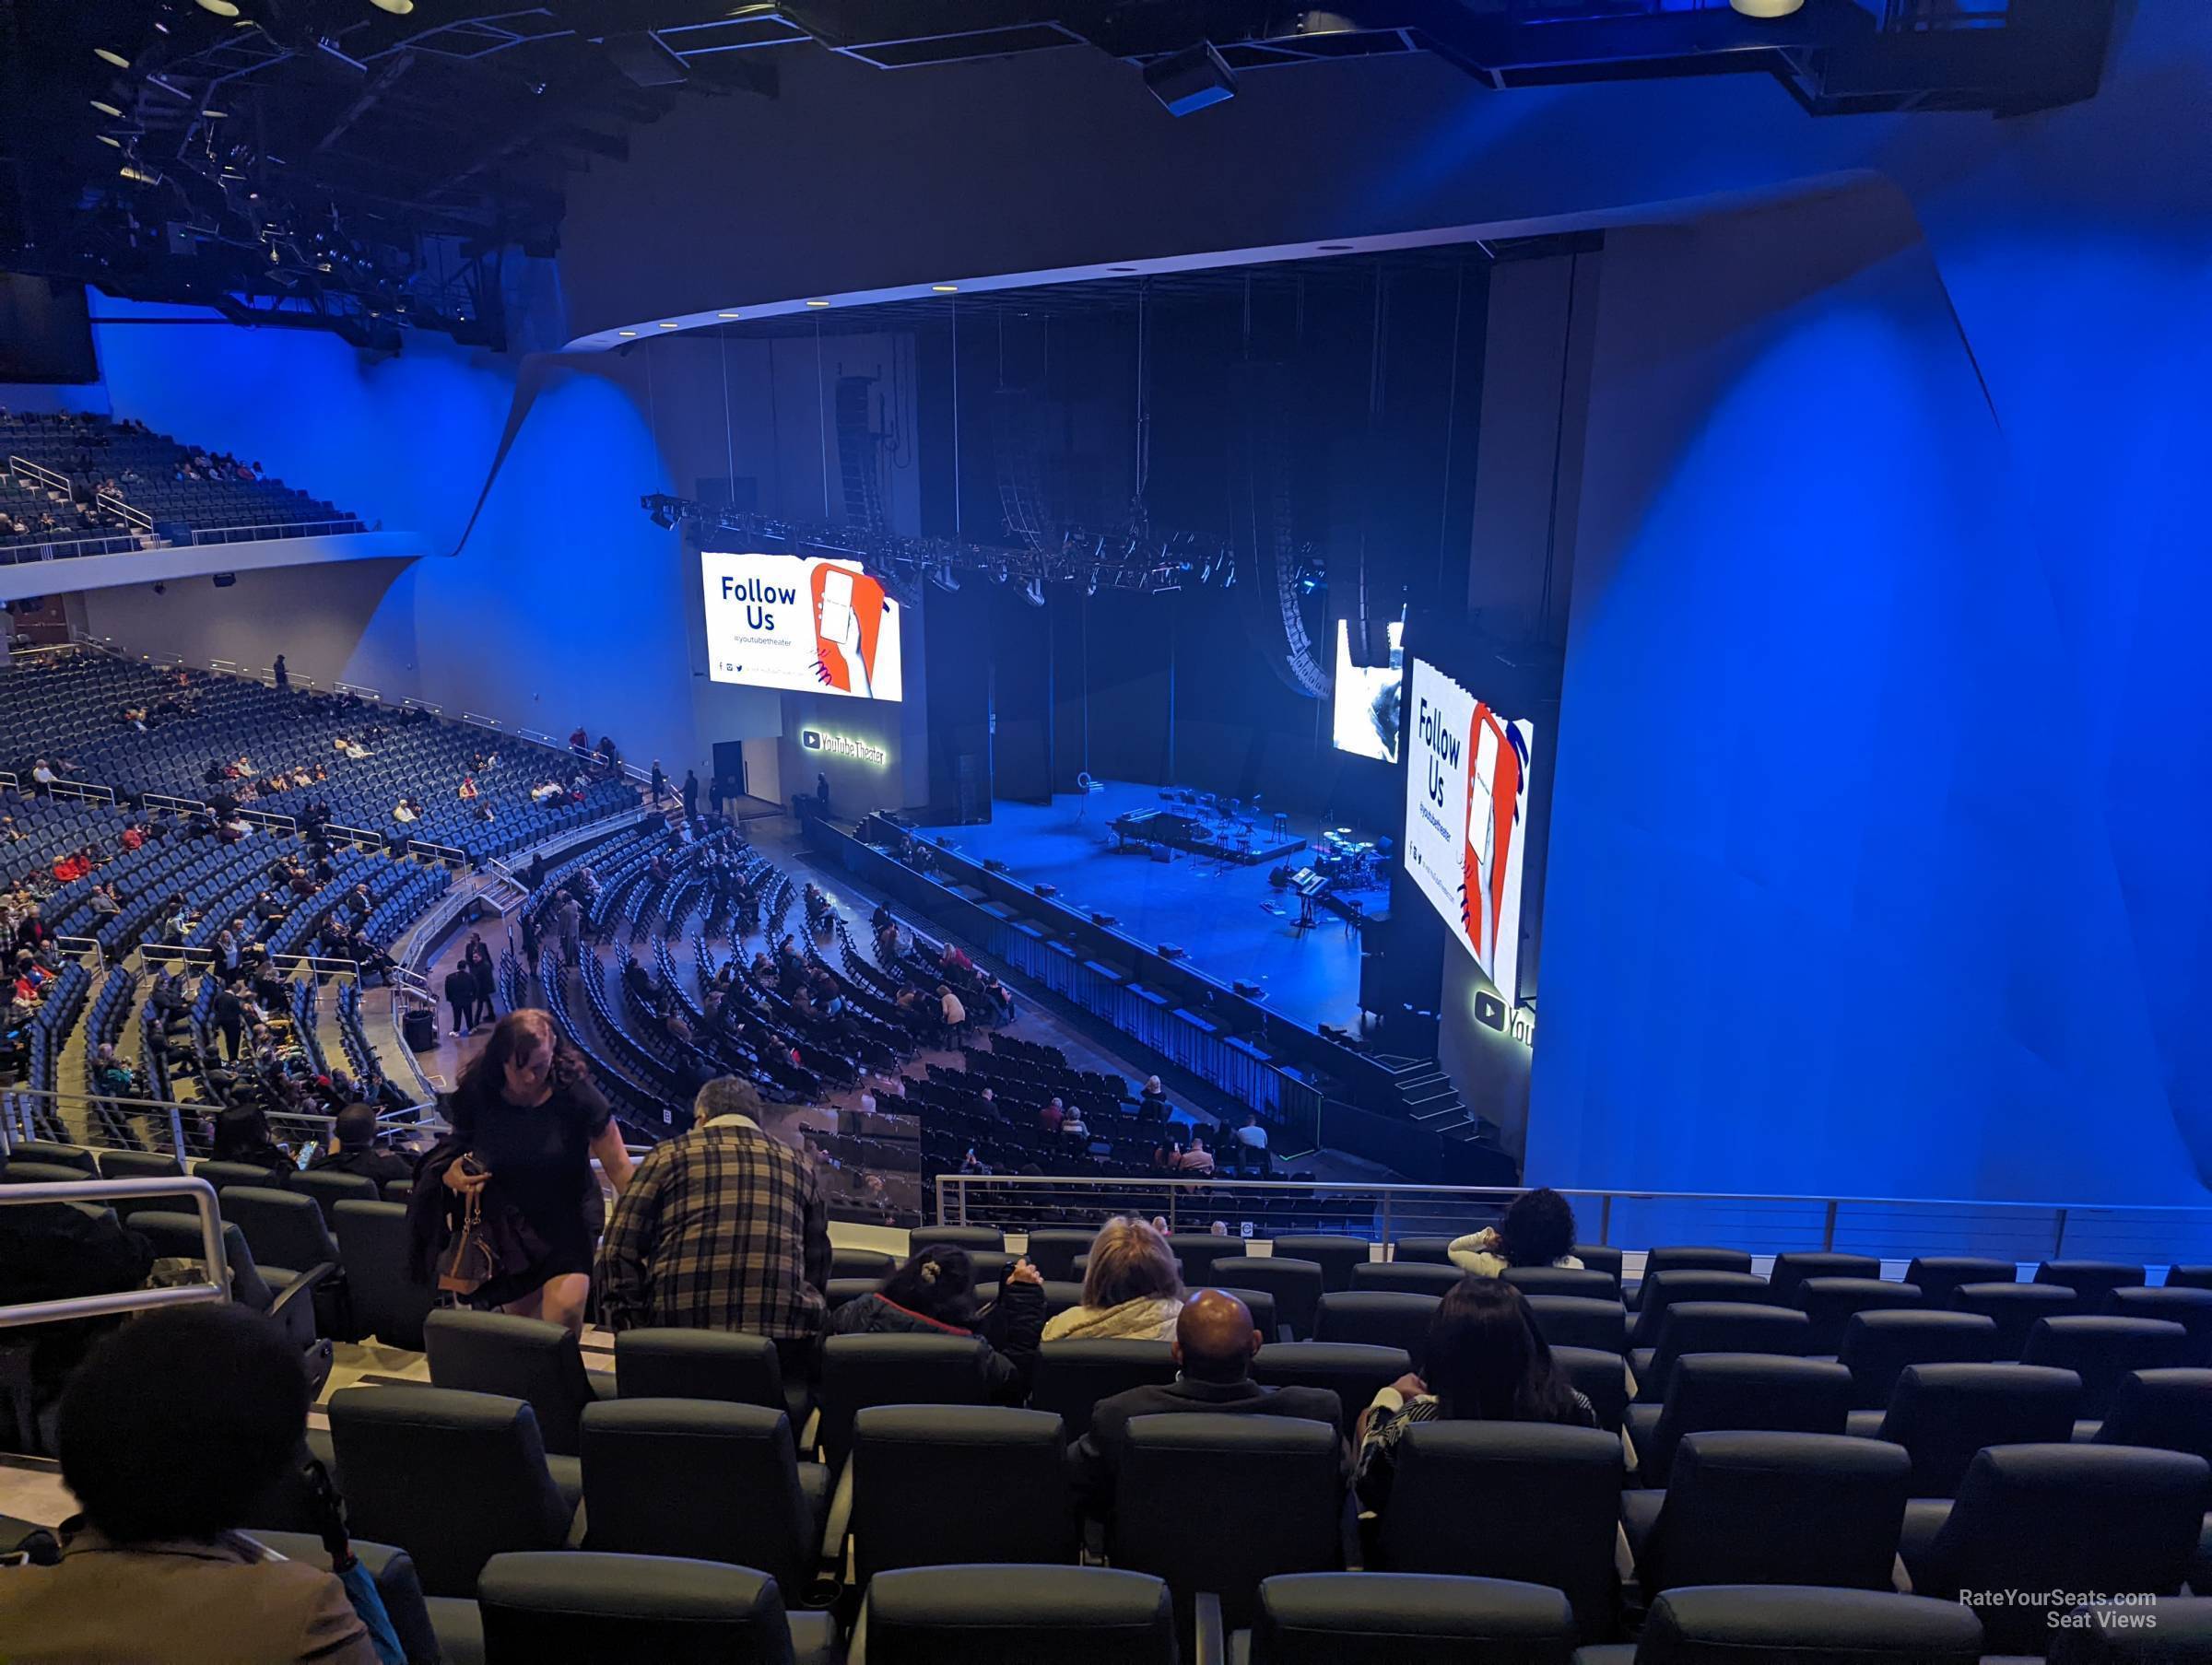 section 207, row h seat view  - youtube theater